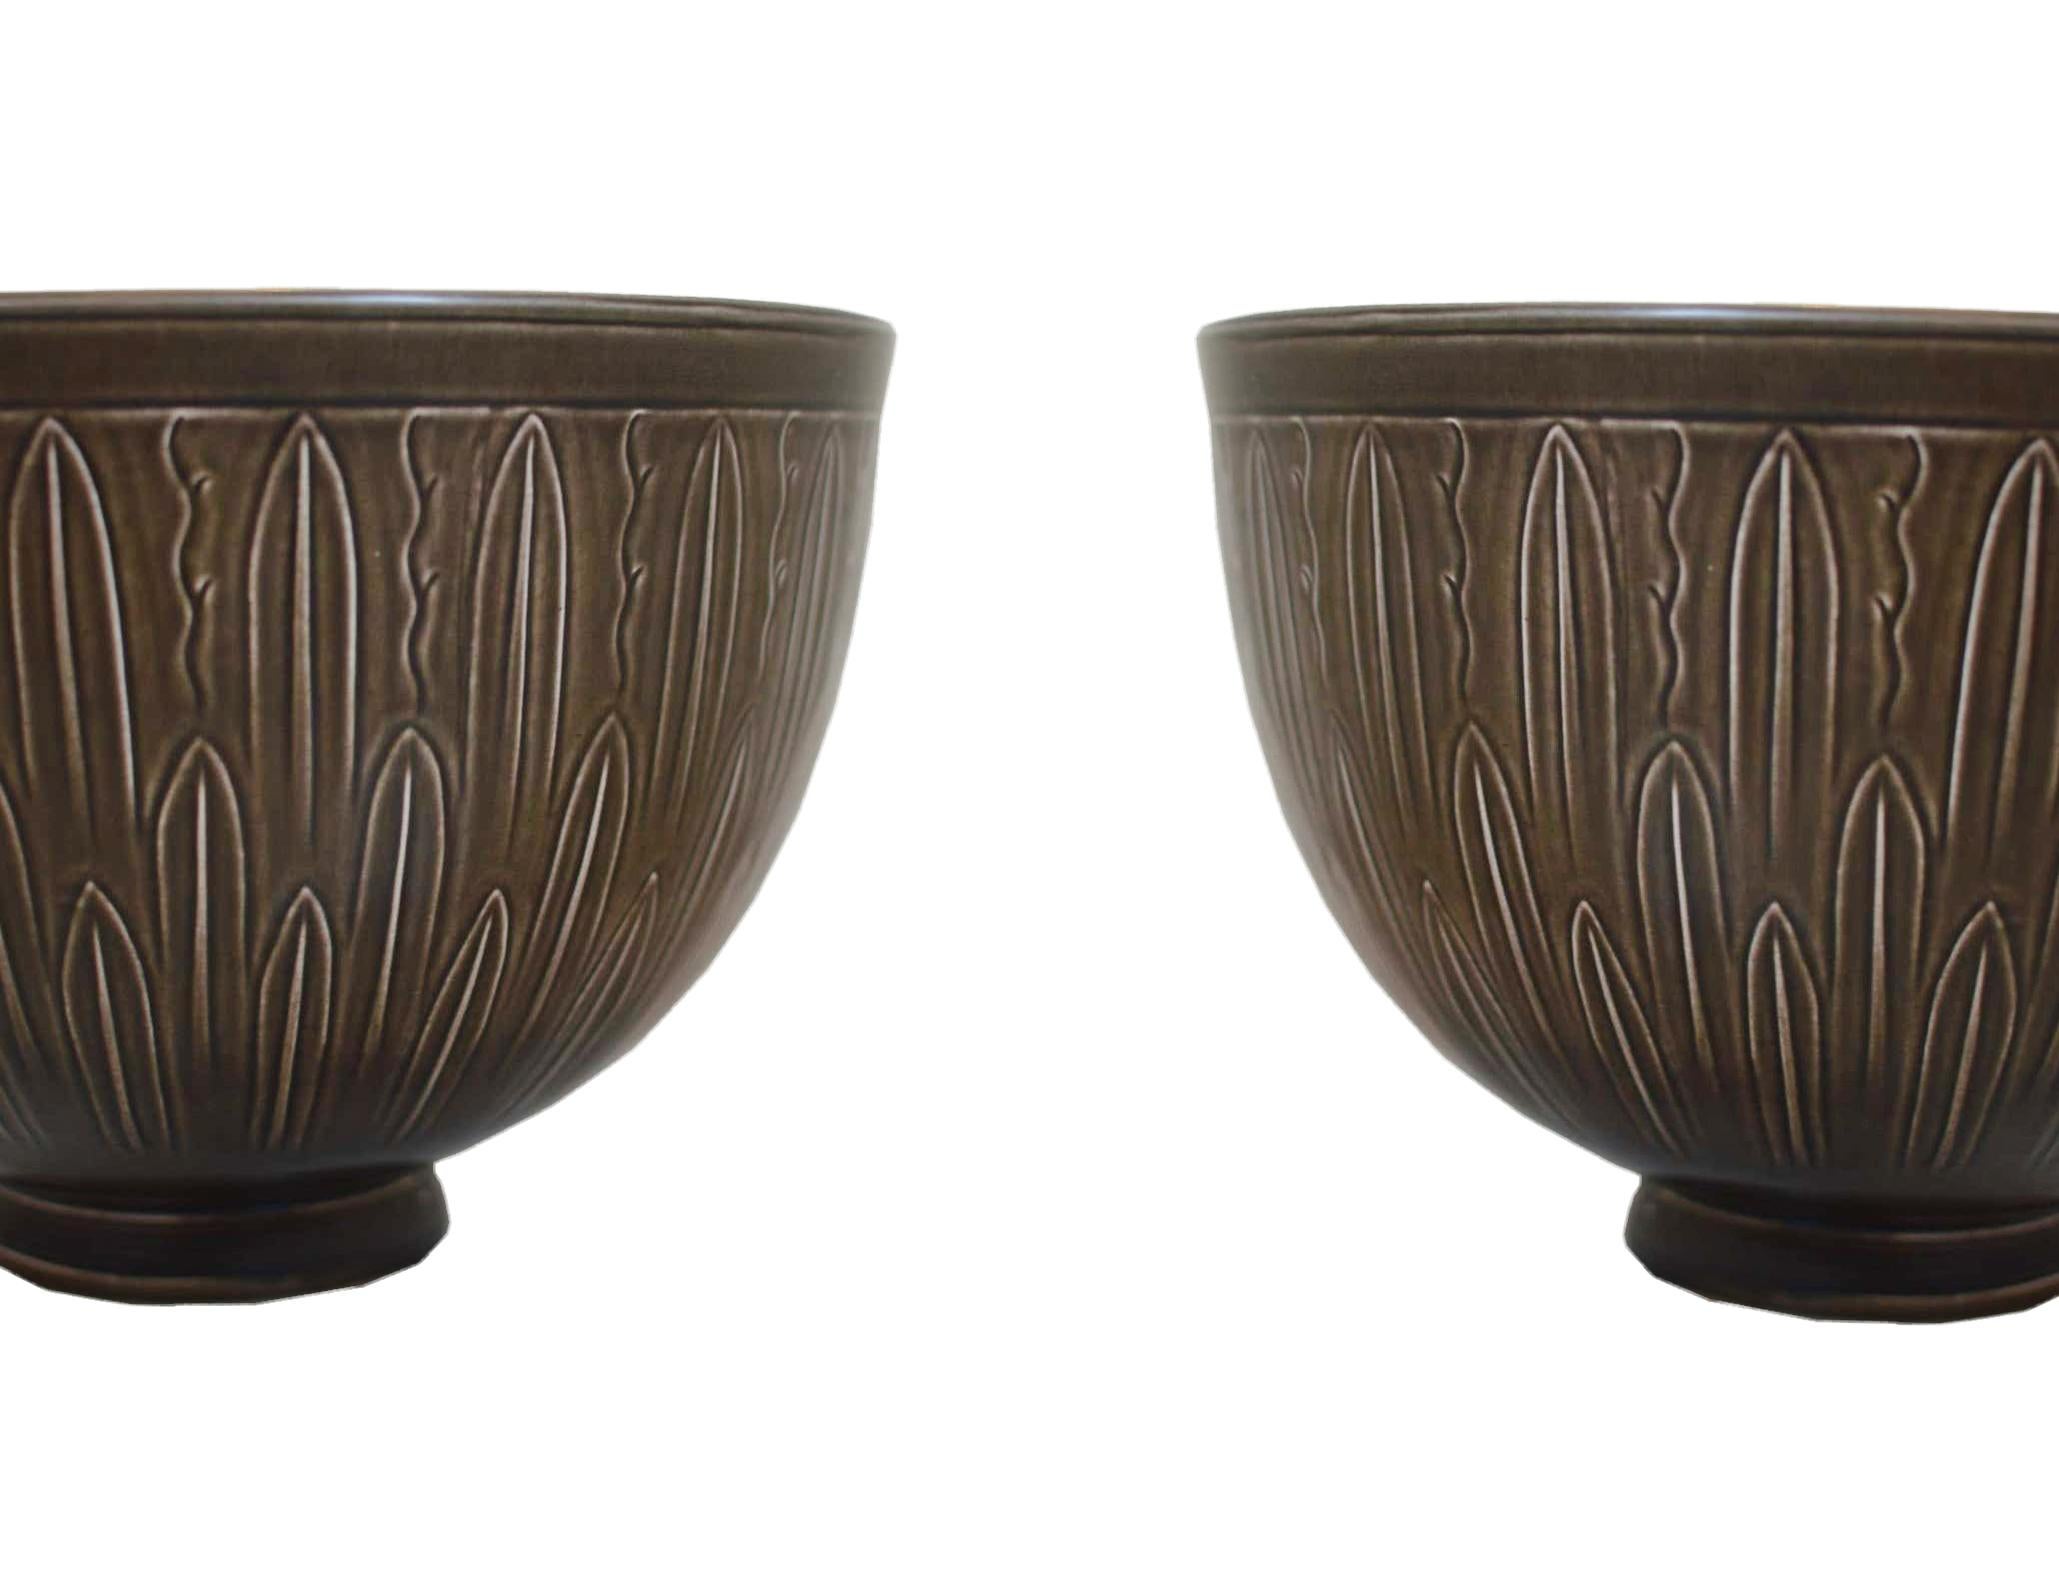 Mid-20th Century Nils Johan Thorvald Thorsson Ceramic bowls for Aluminia 1930s Sweden For Sale